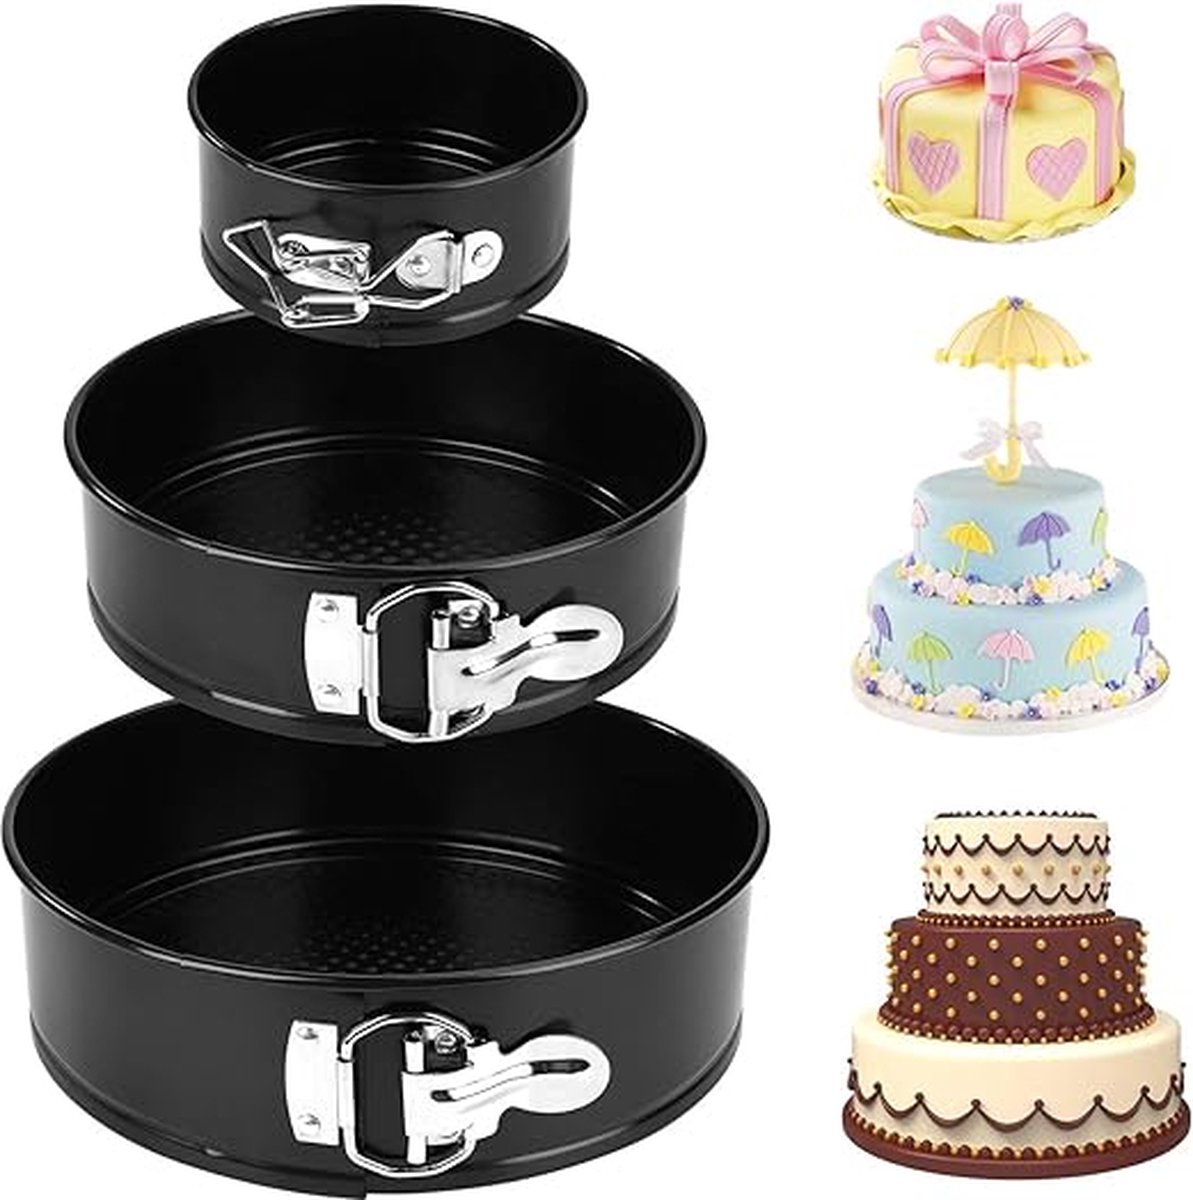 3 Pieces Non-Stick Open Cake Mould, Round for Black Carbon Steel Cake Mould, 10.2 cm, 18 cm and 22 cm